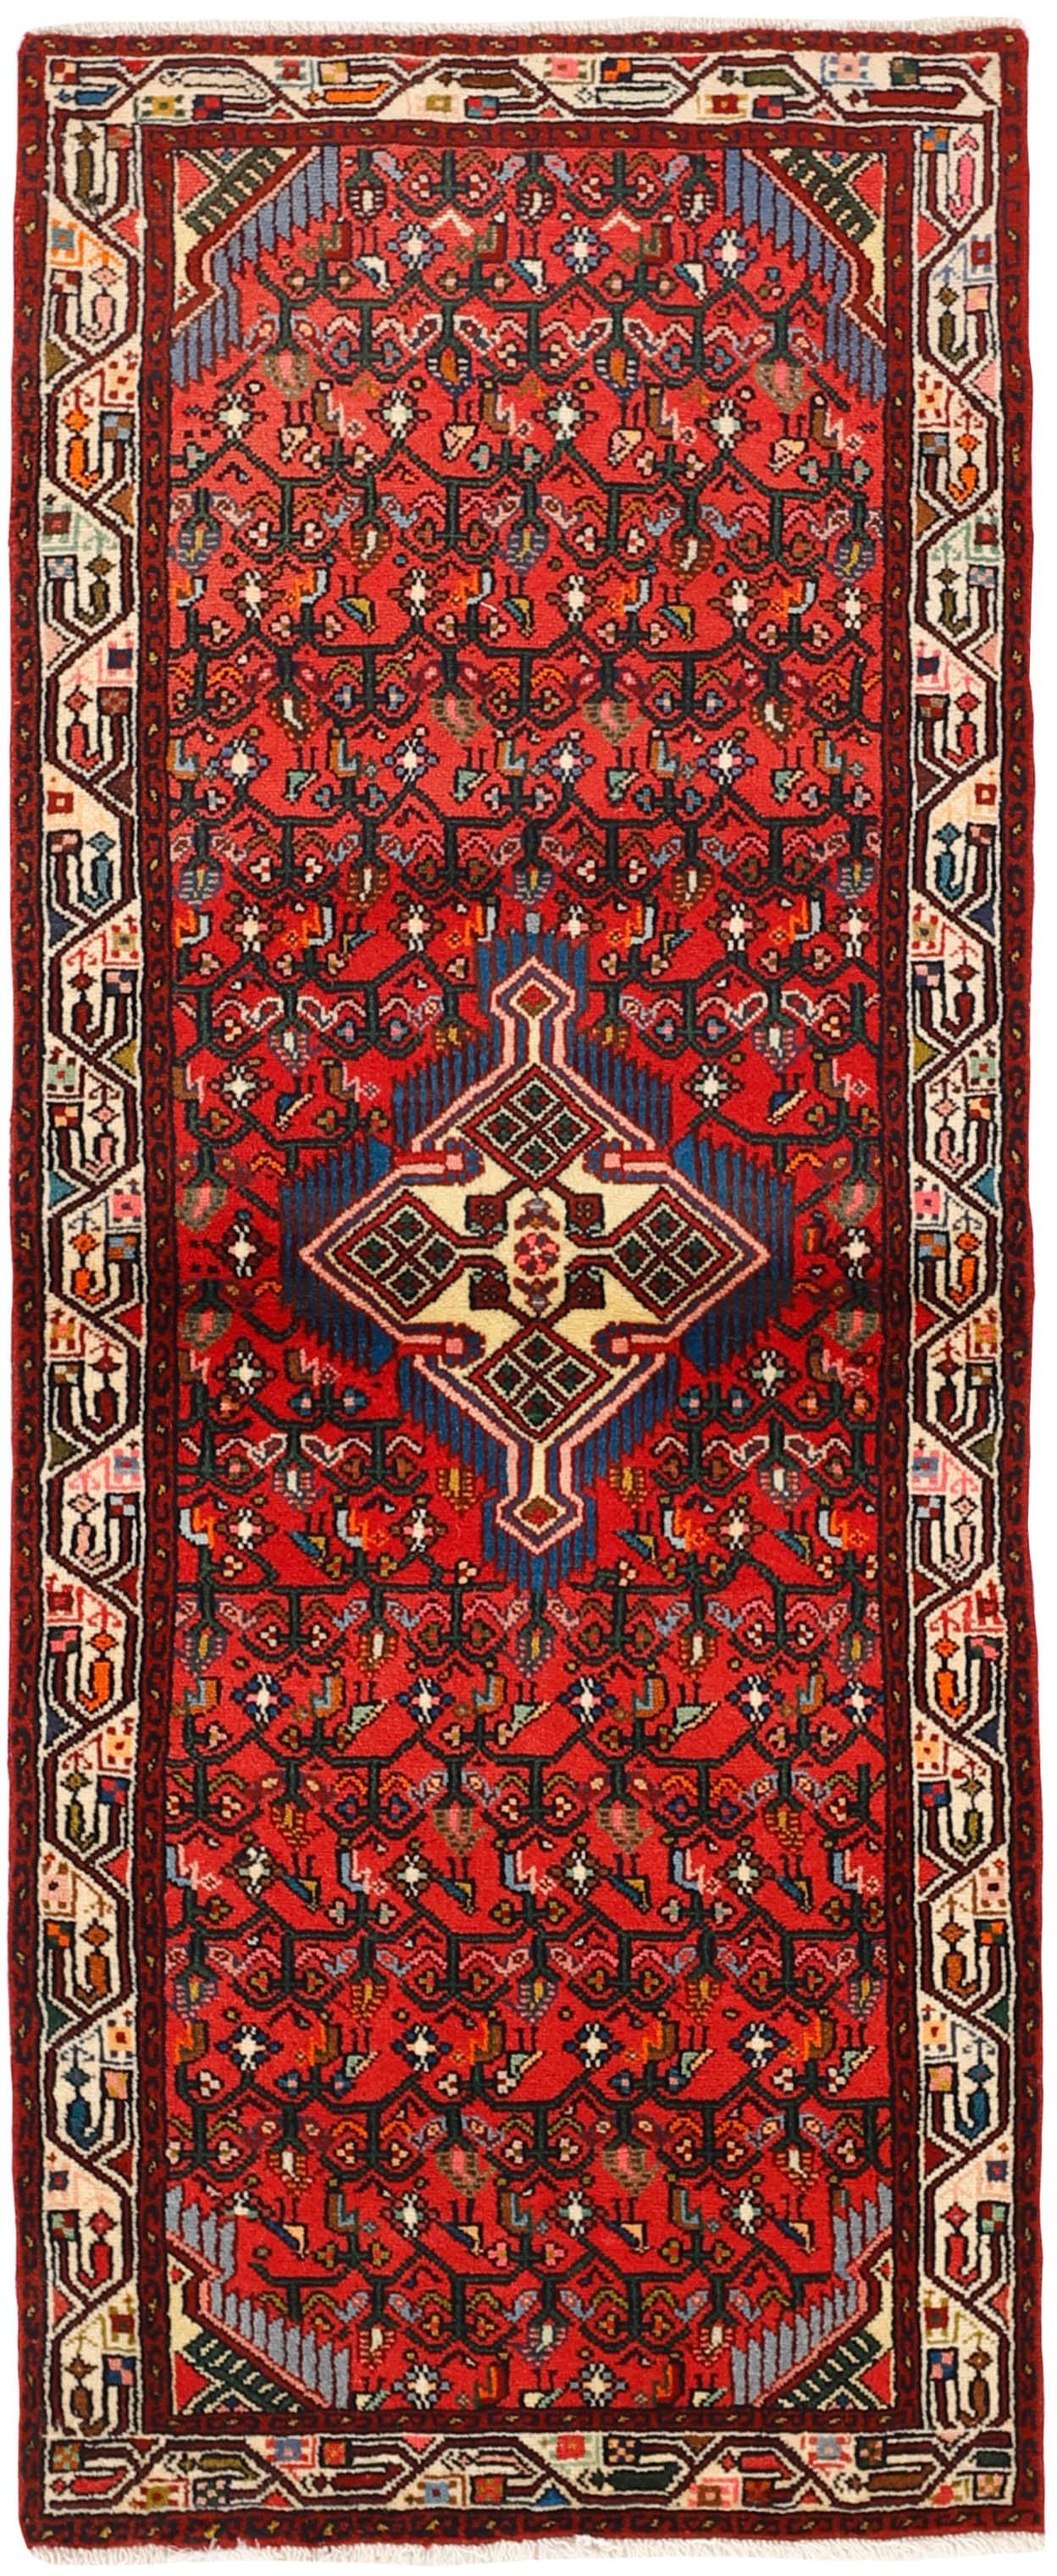 Red and black traditional persian rug with floral design